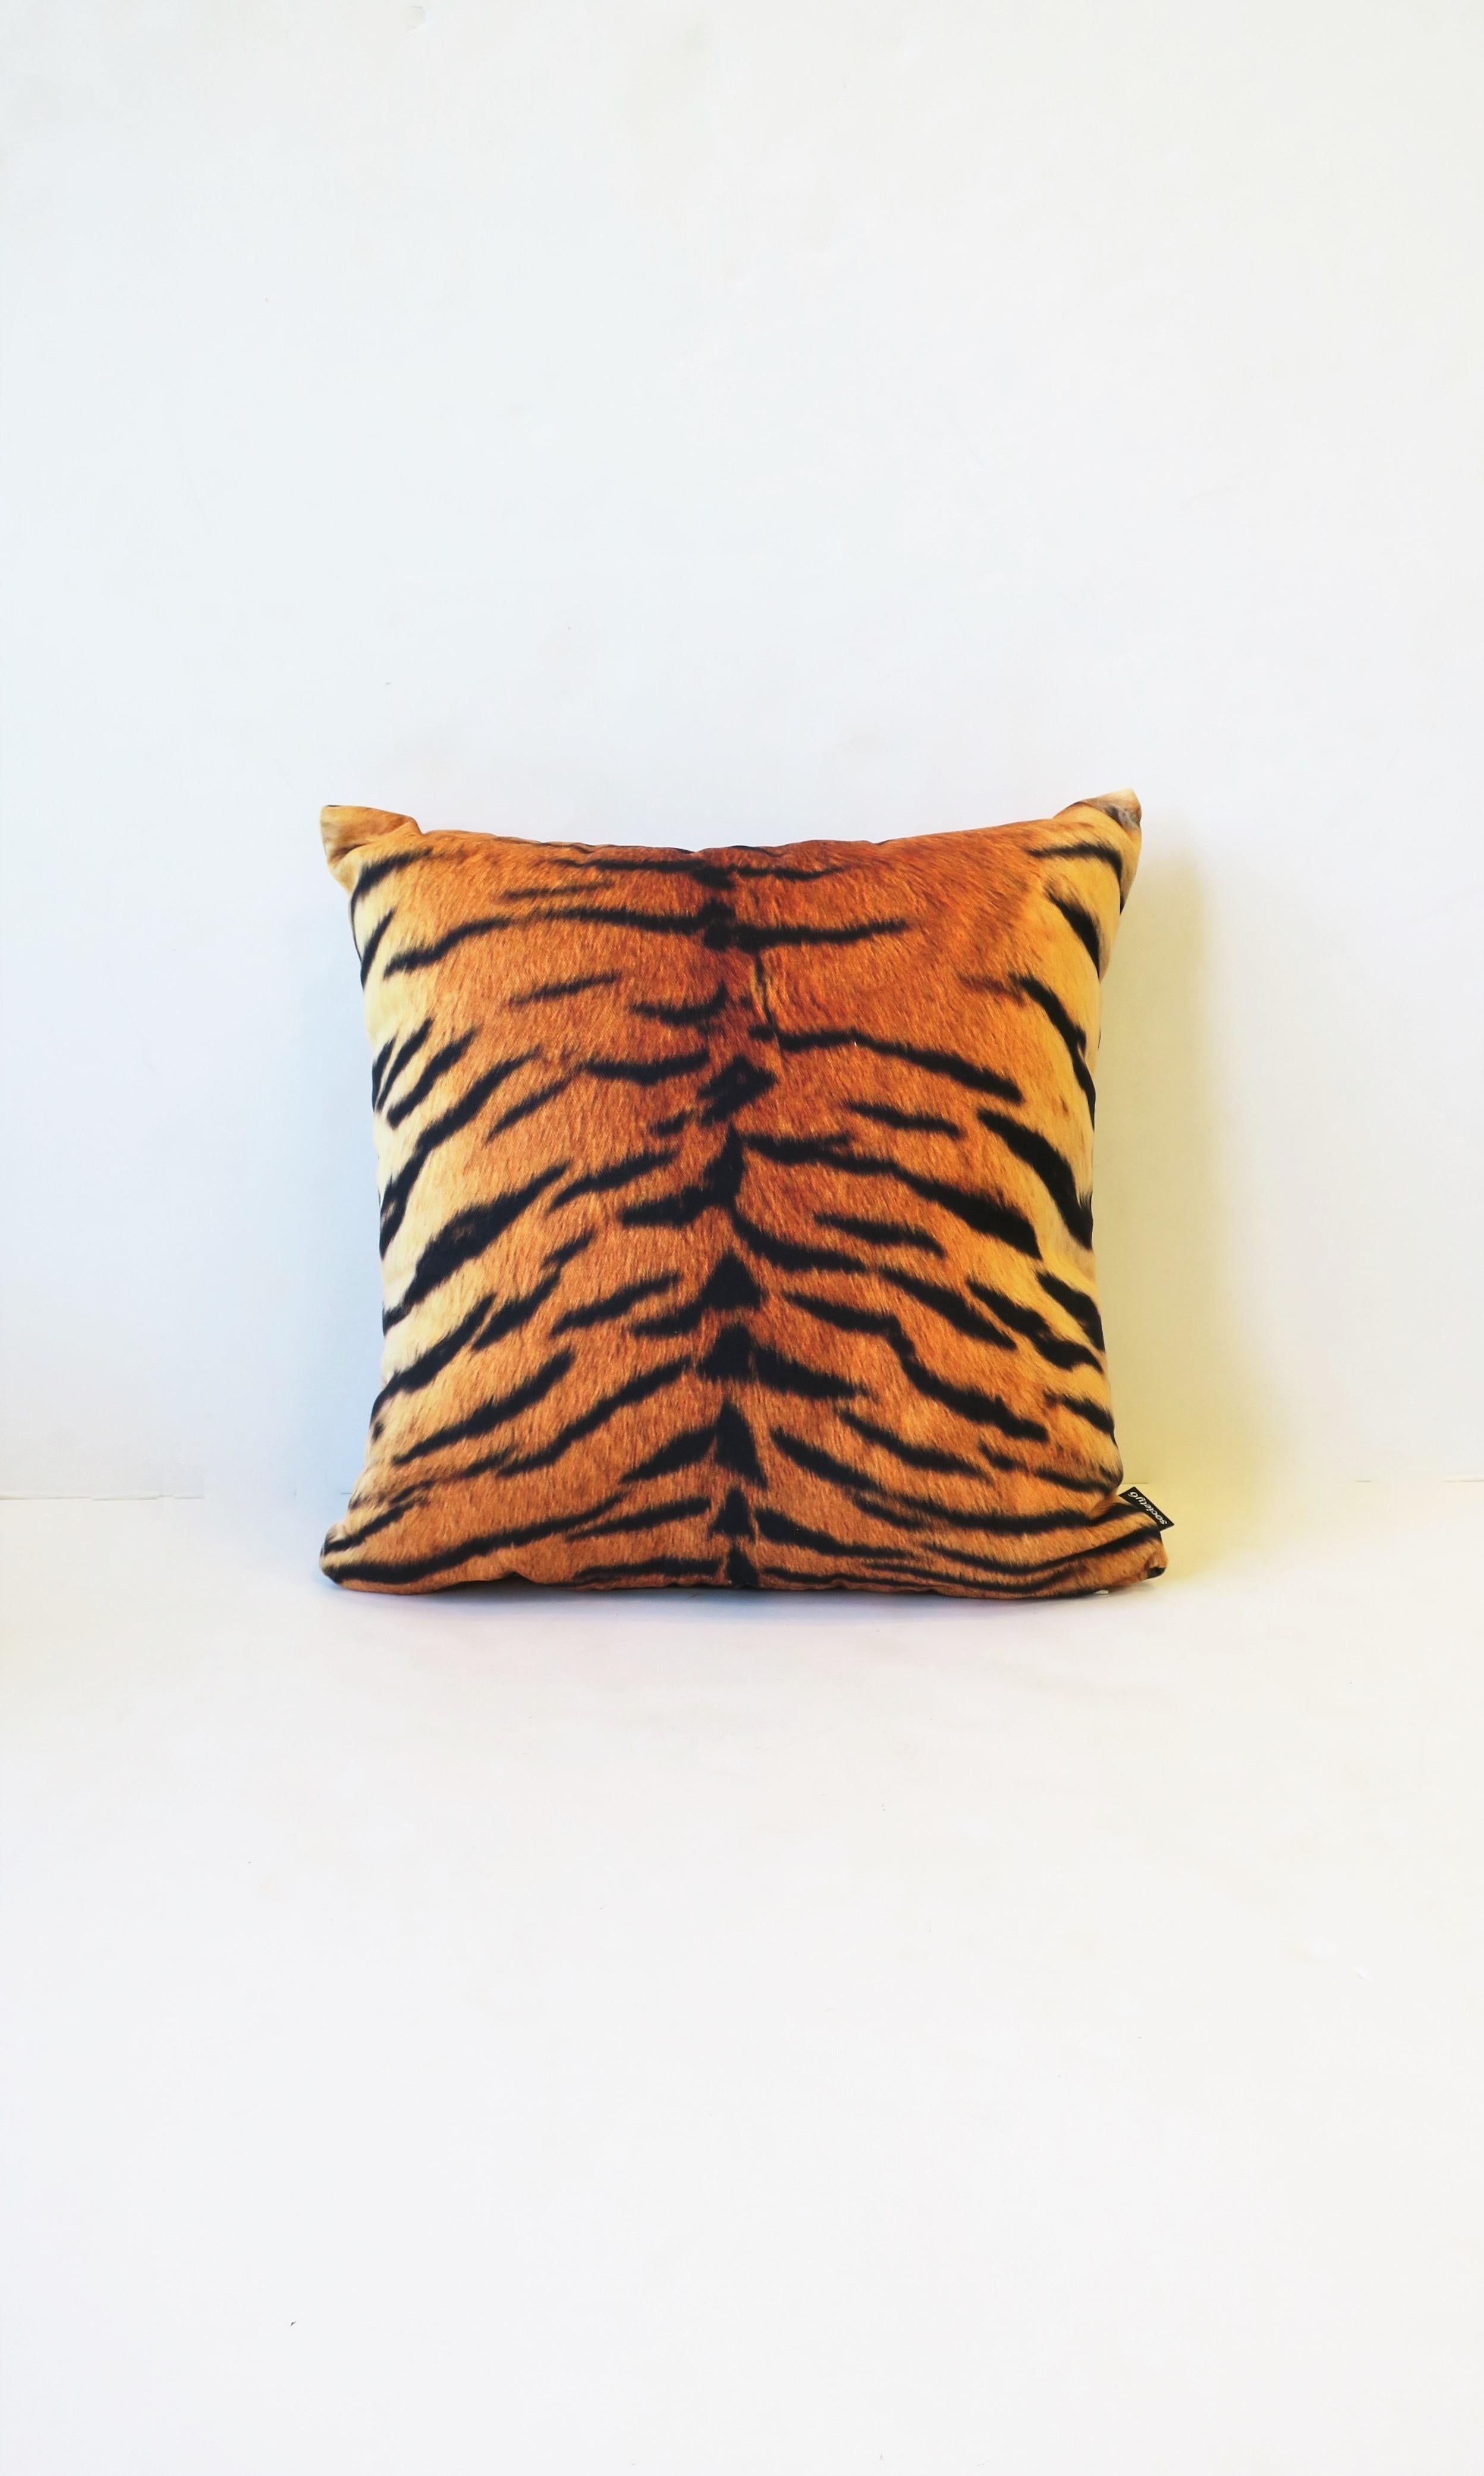 A new tiger cat animal print cotton throw pillow, with zipper and insert. In original wrapping (new/never used.) Made in the USA. Measures: 14